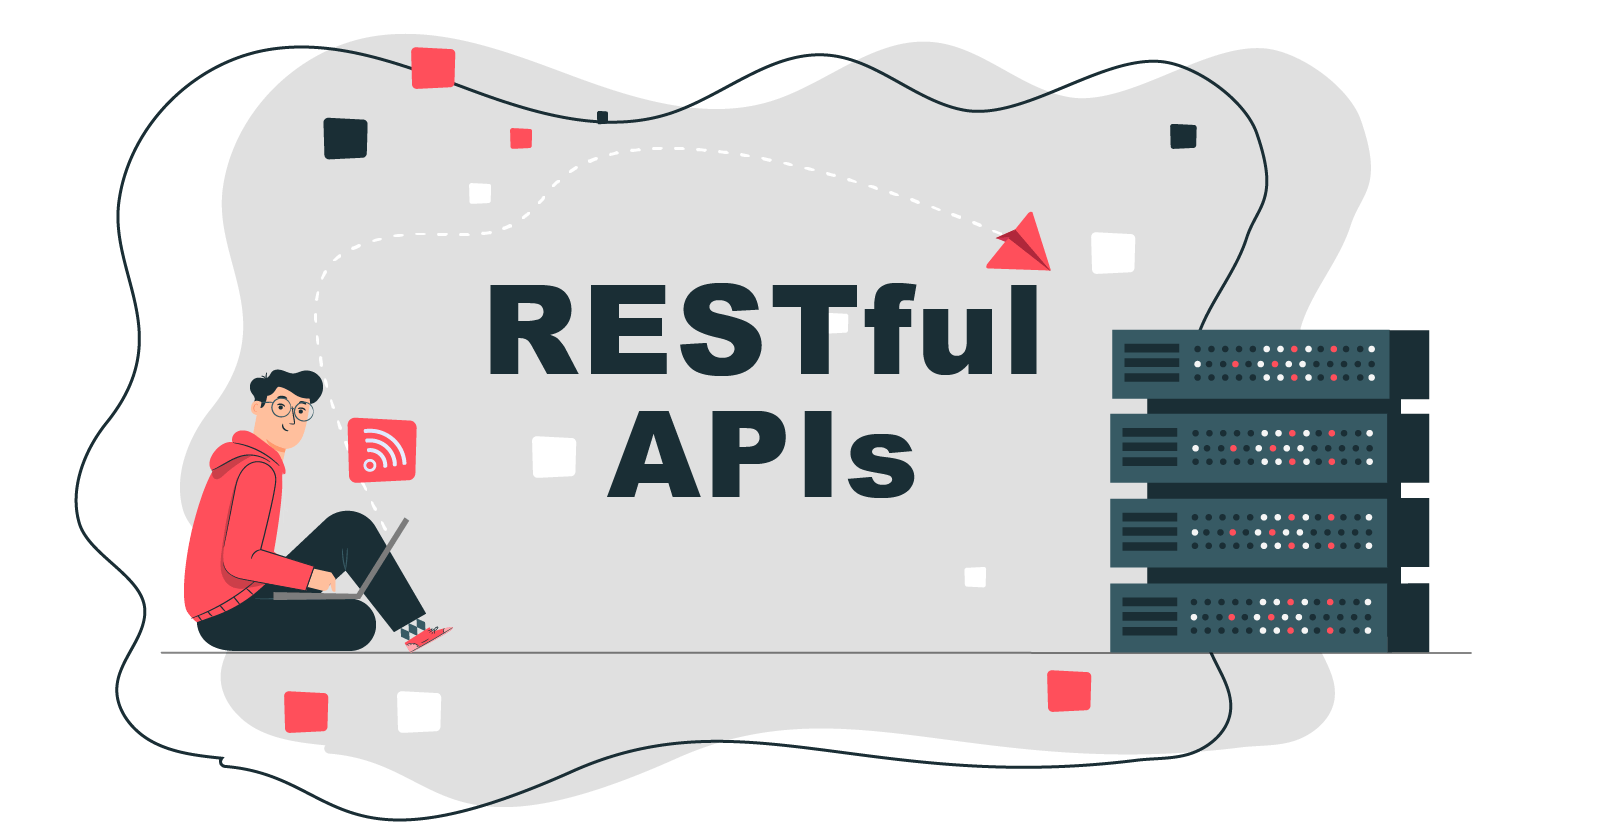 /restful-apis-in-4-minutes feature image